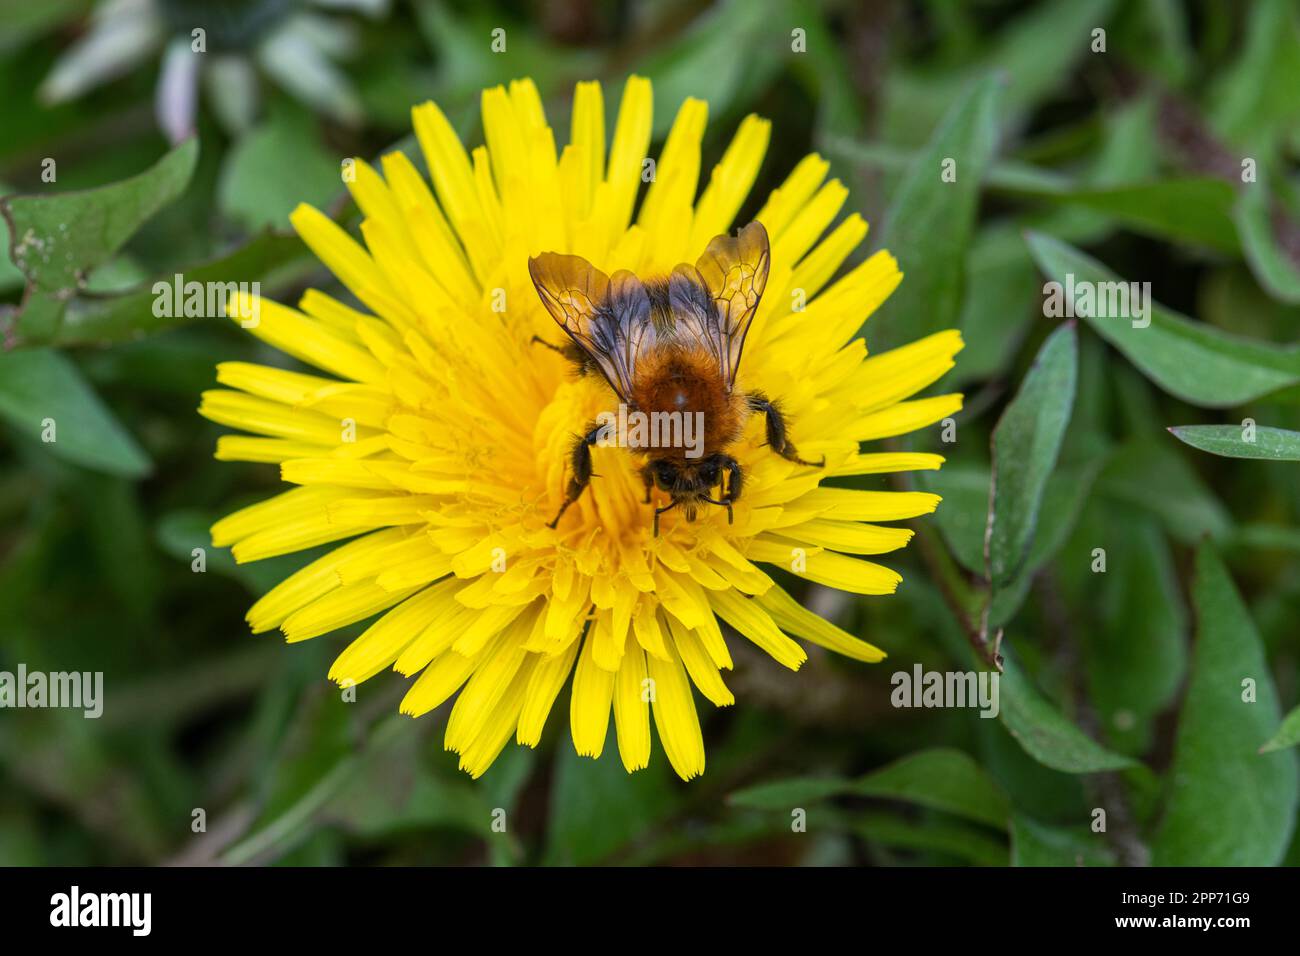 Common carder bee (Bombus pascuorum), a bumblebee, nectaring on a common dandelion flower (Taraxacum officinale), England, UK Stock Photo